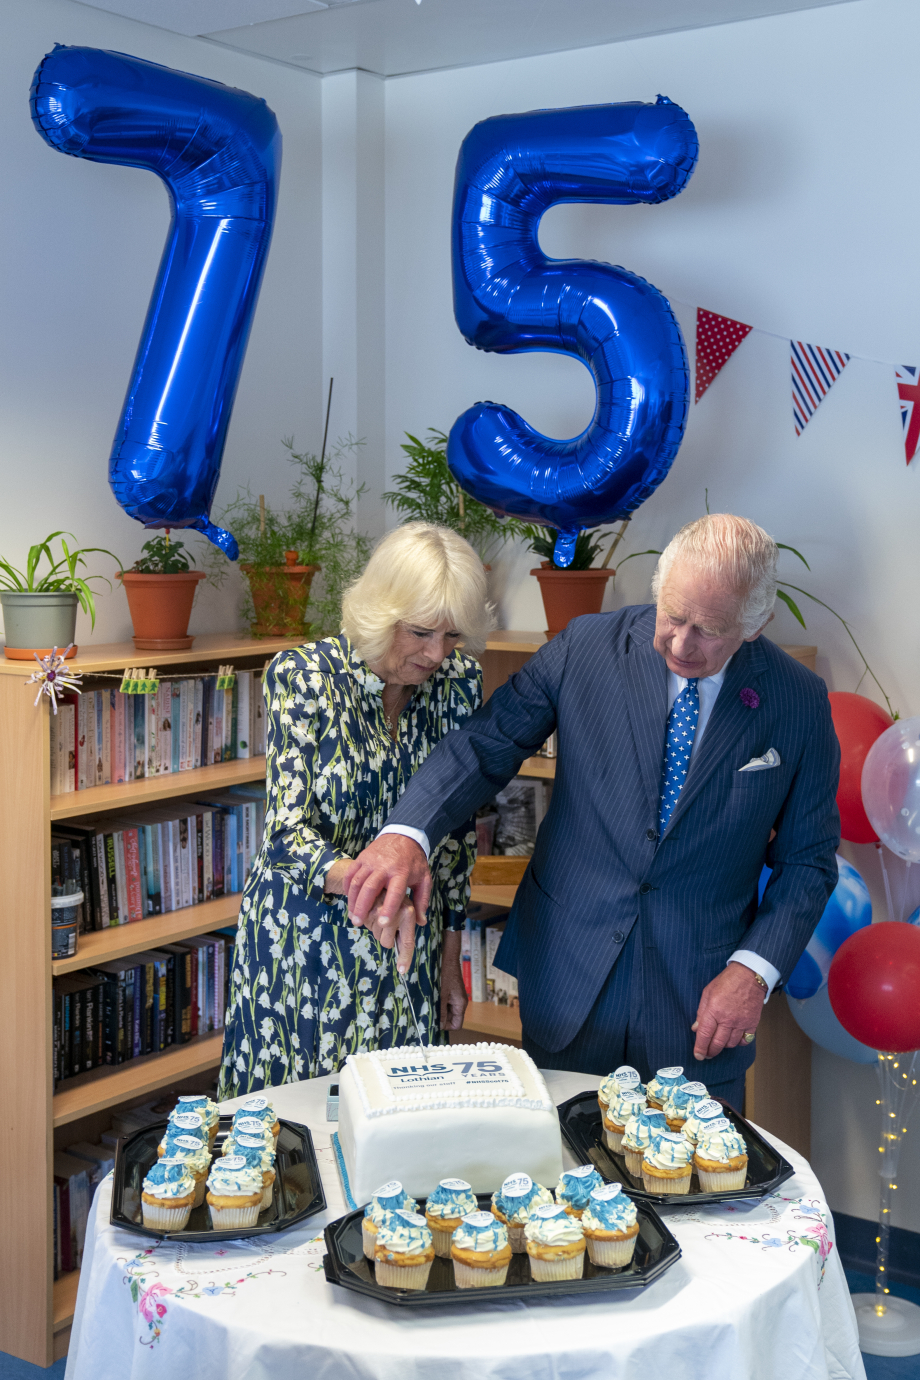 The King and Queen cut a cake to mark 75 years of the NHS